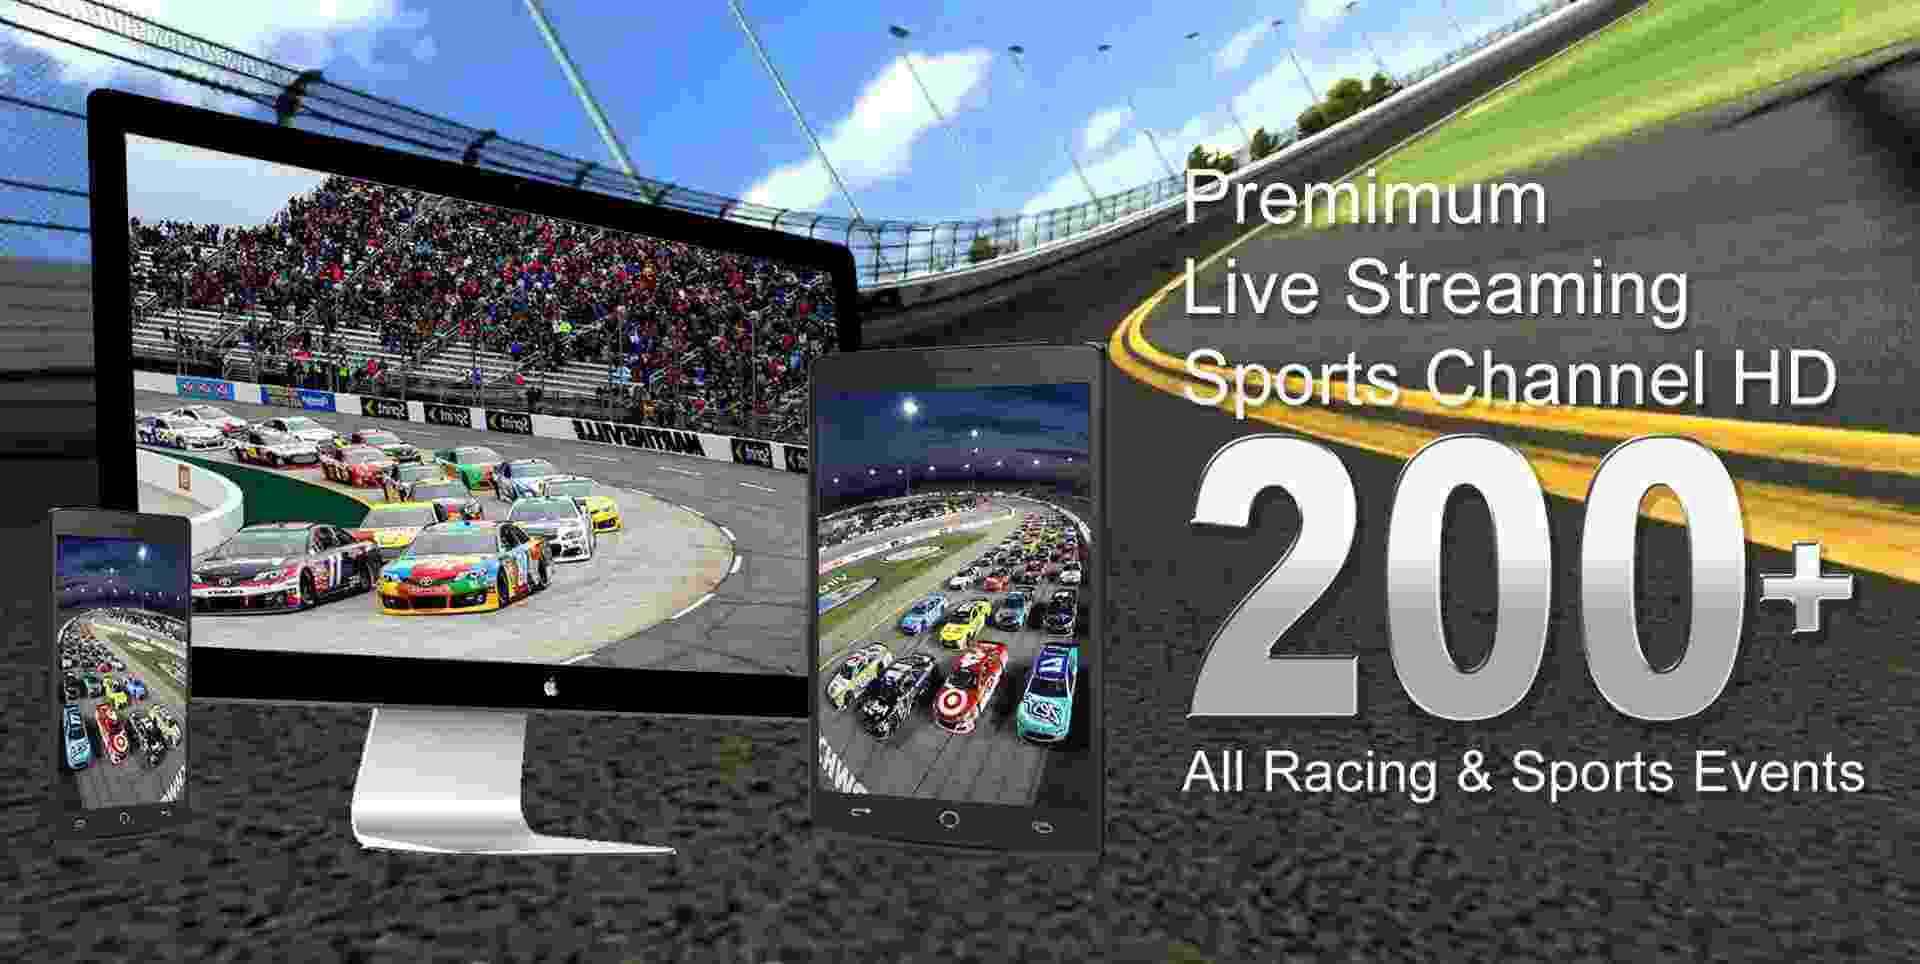 chicagoland-speedway-xfinity-series-race-2015-live